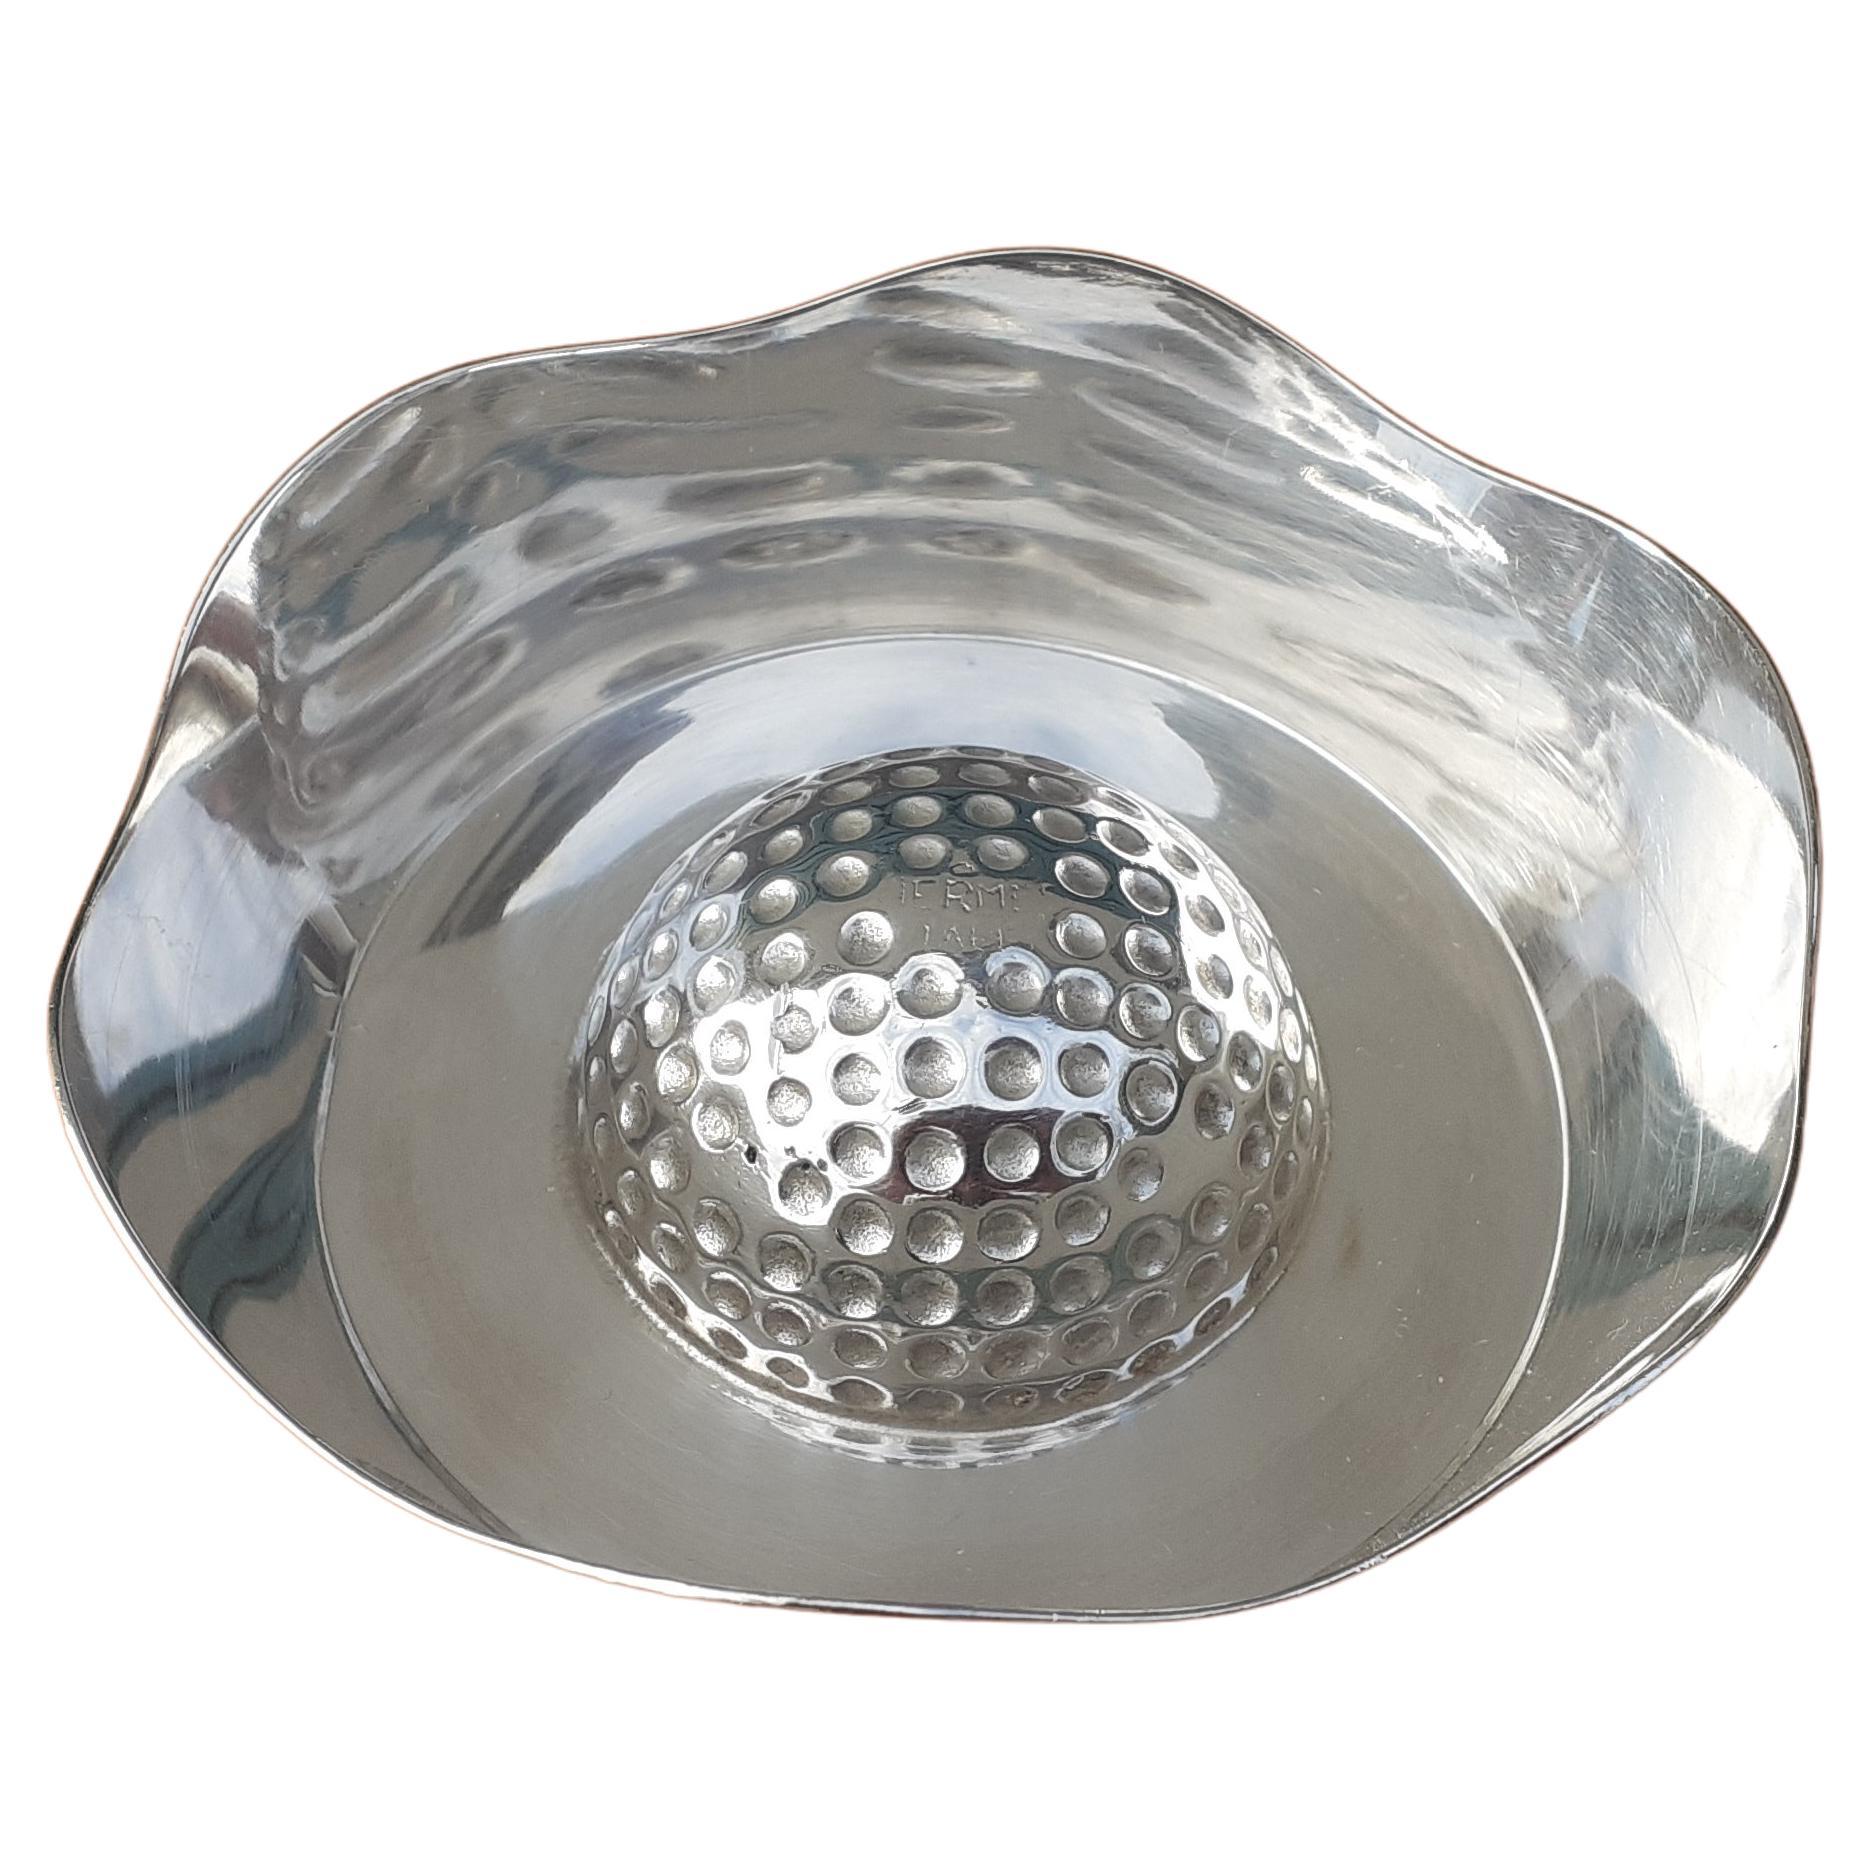 Rare Hermès Ashtray Change Tray Golf Ball Shaped Ravinet d'Enfert in Silver For Sale